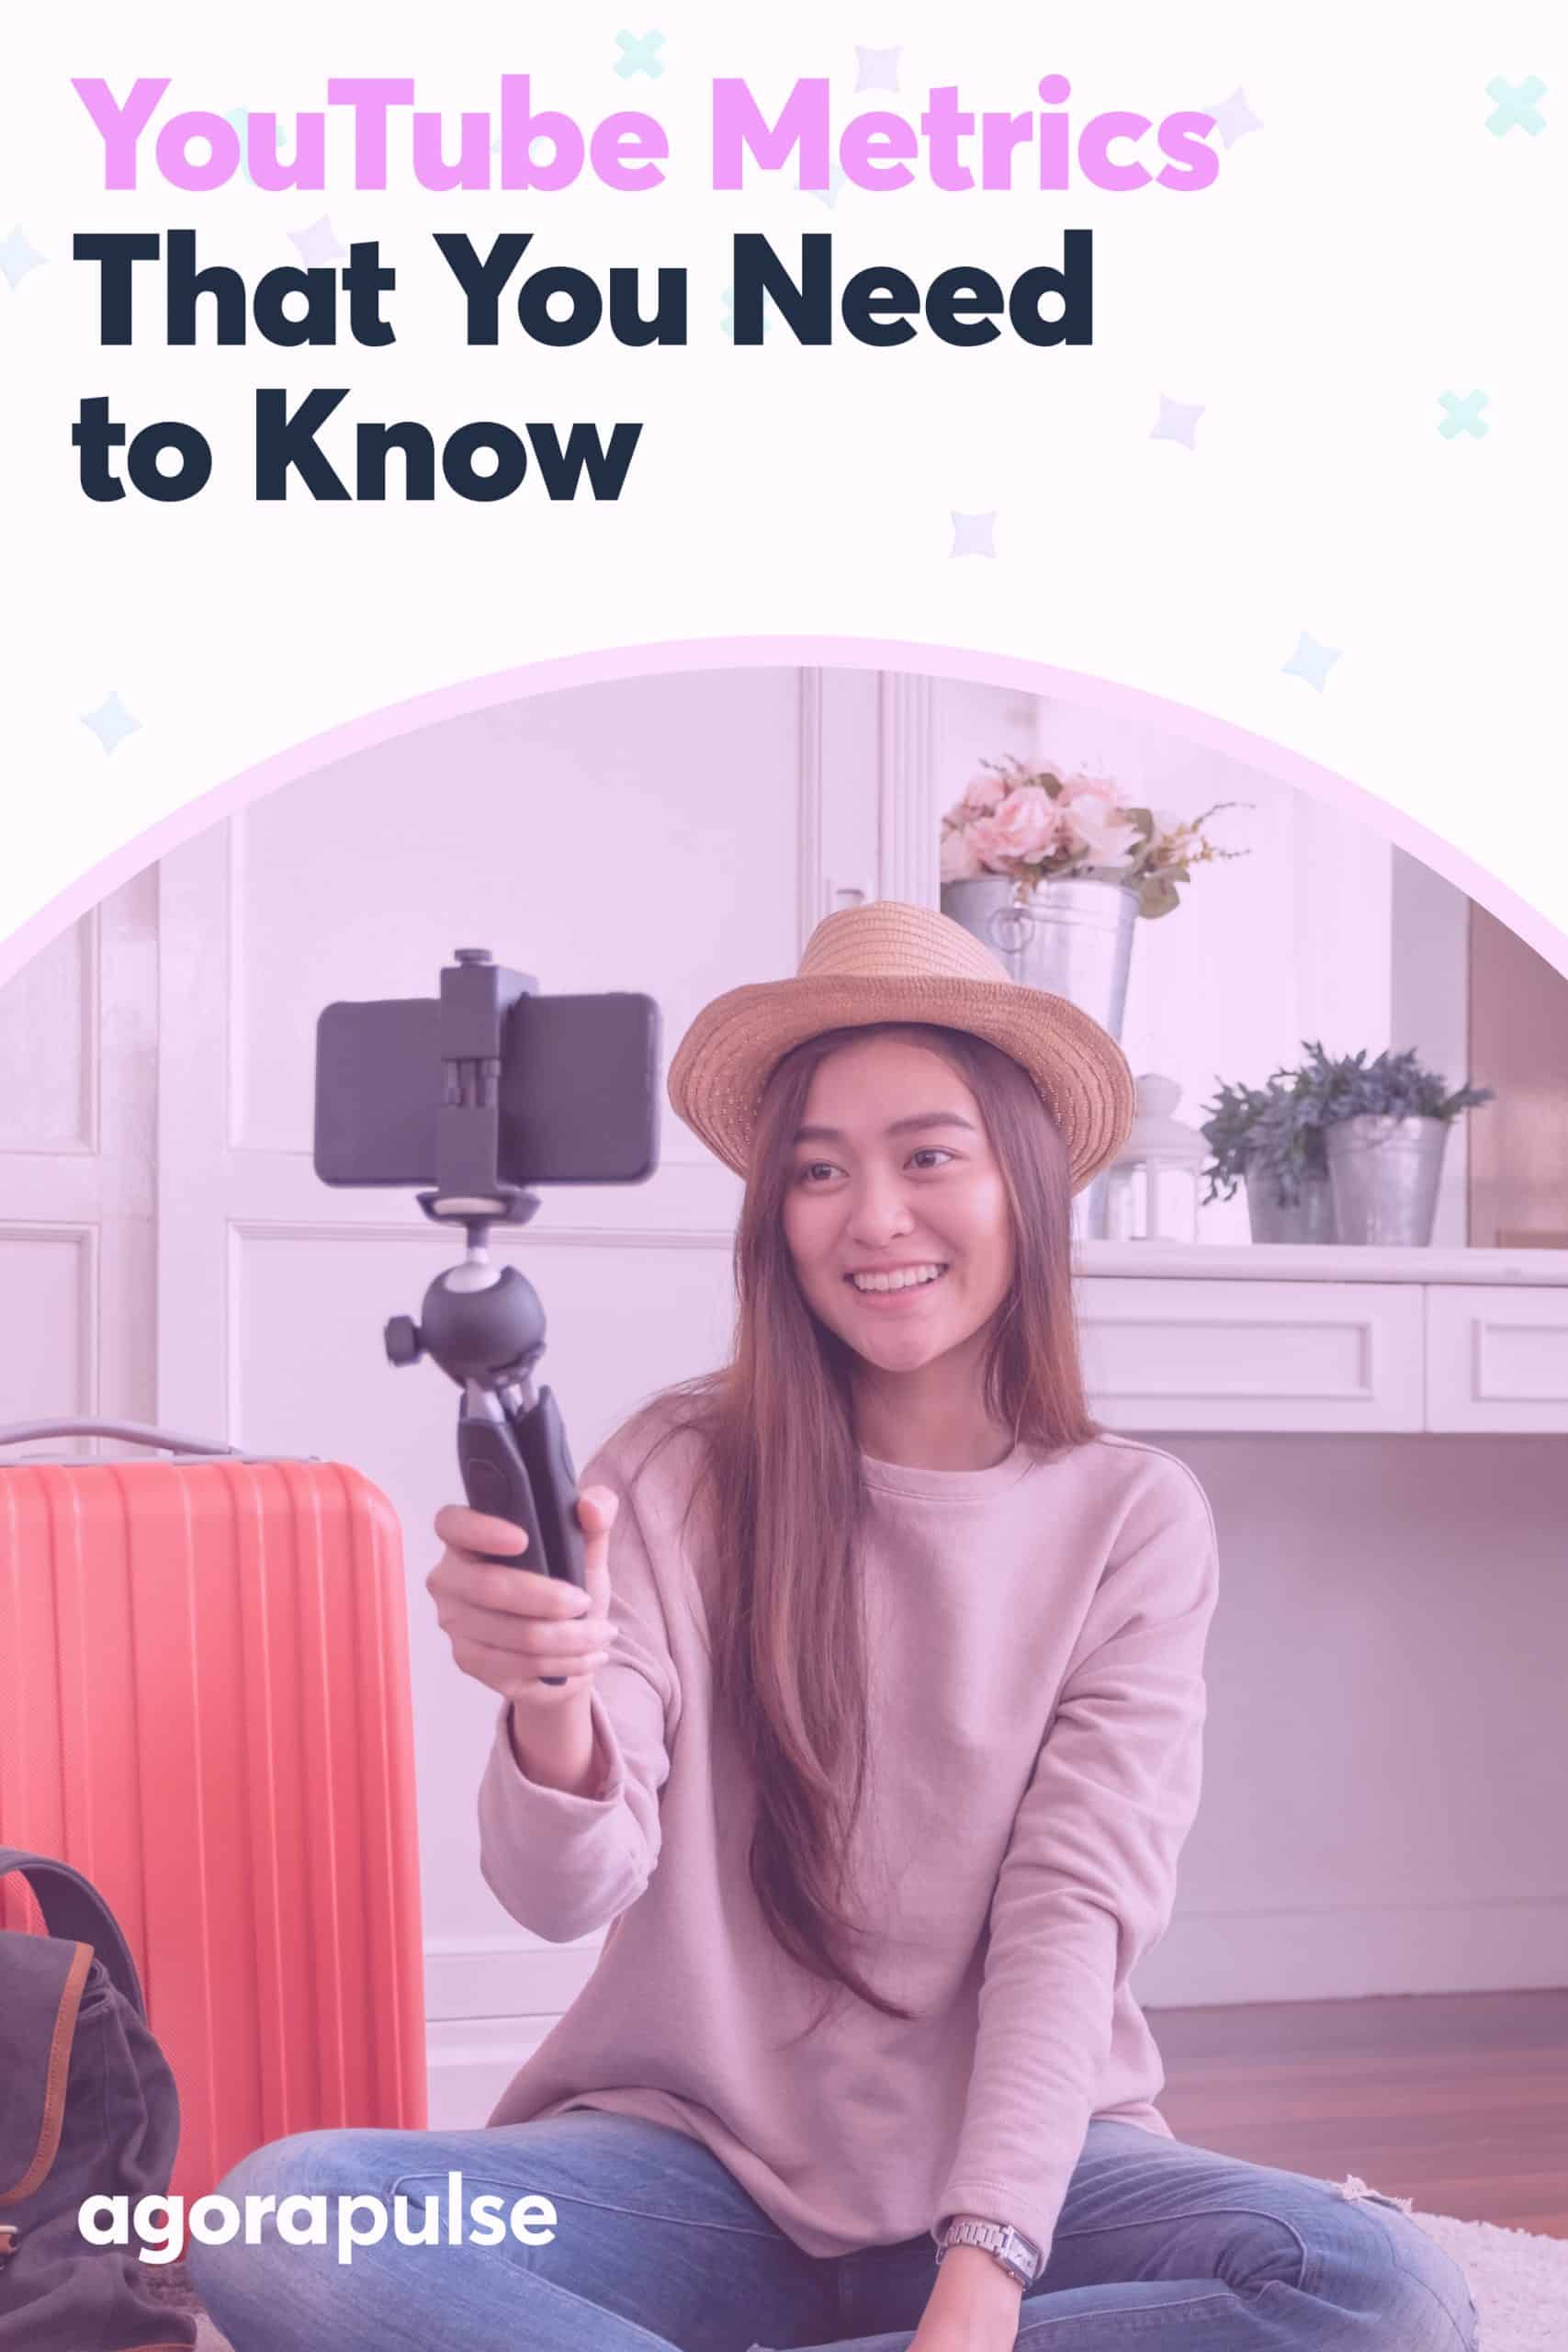 YouTube Metrics That You Need to Know